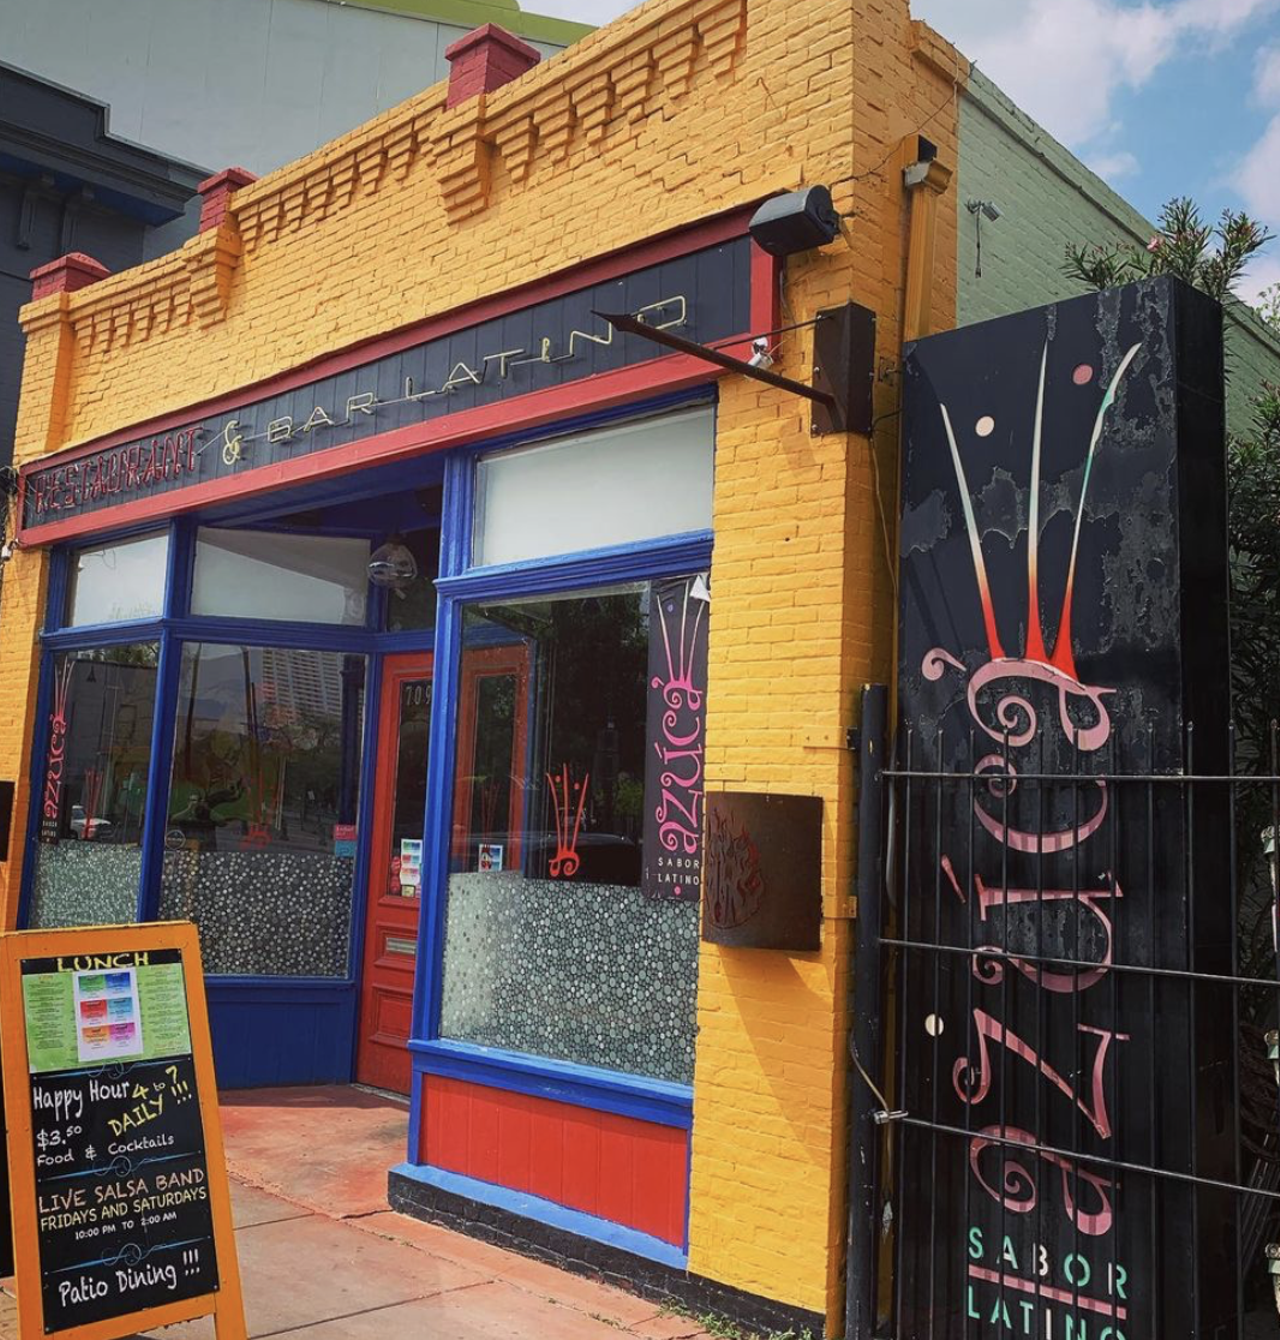 Hola!
328 Martinez St.
Chef-owner Rene Fernandez, who helms Southtown’s Azuca Nuevo Latino, will expand his restaurant empire via Hola!, a new contemporary tapas and wine bar. The chef is in the early planning stages for a low-key space that he hopes to open later this year.  
Photo via Instagram / mucksetfils